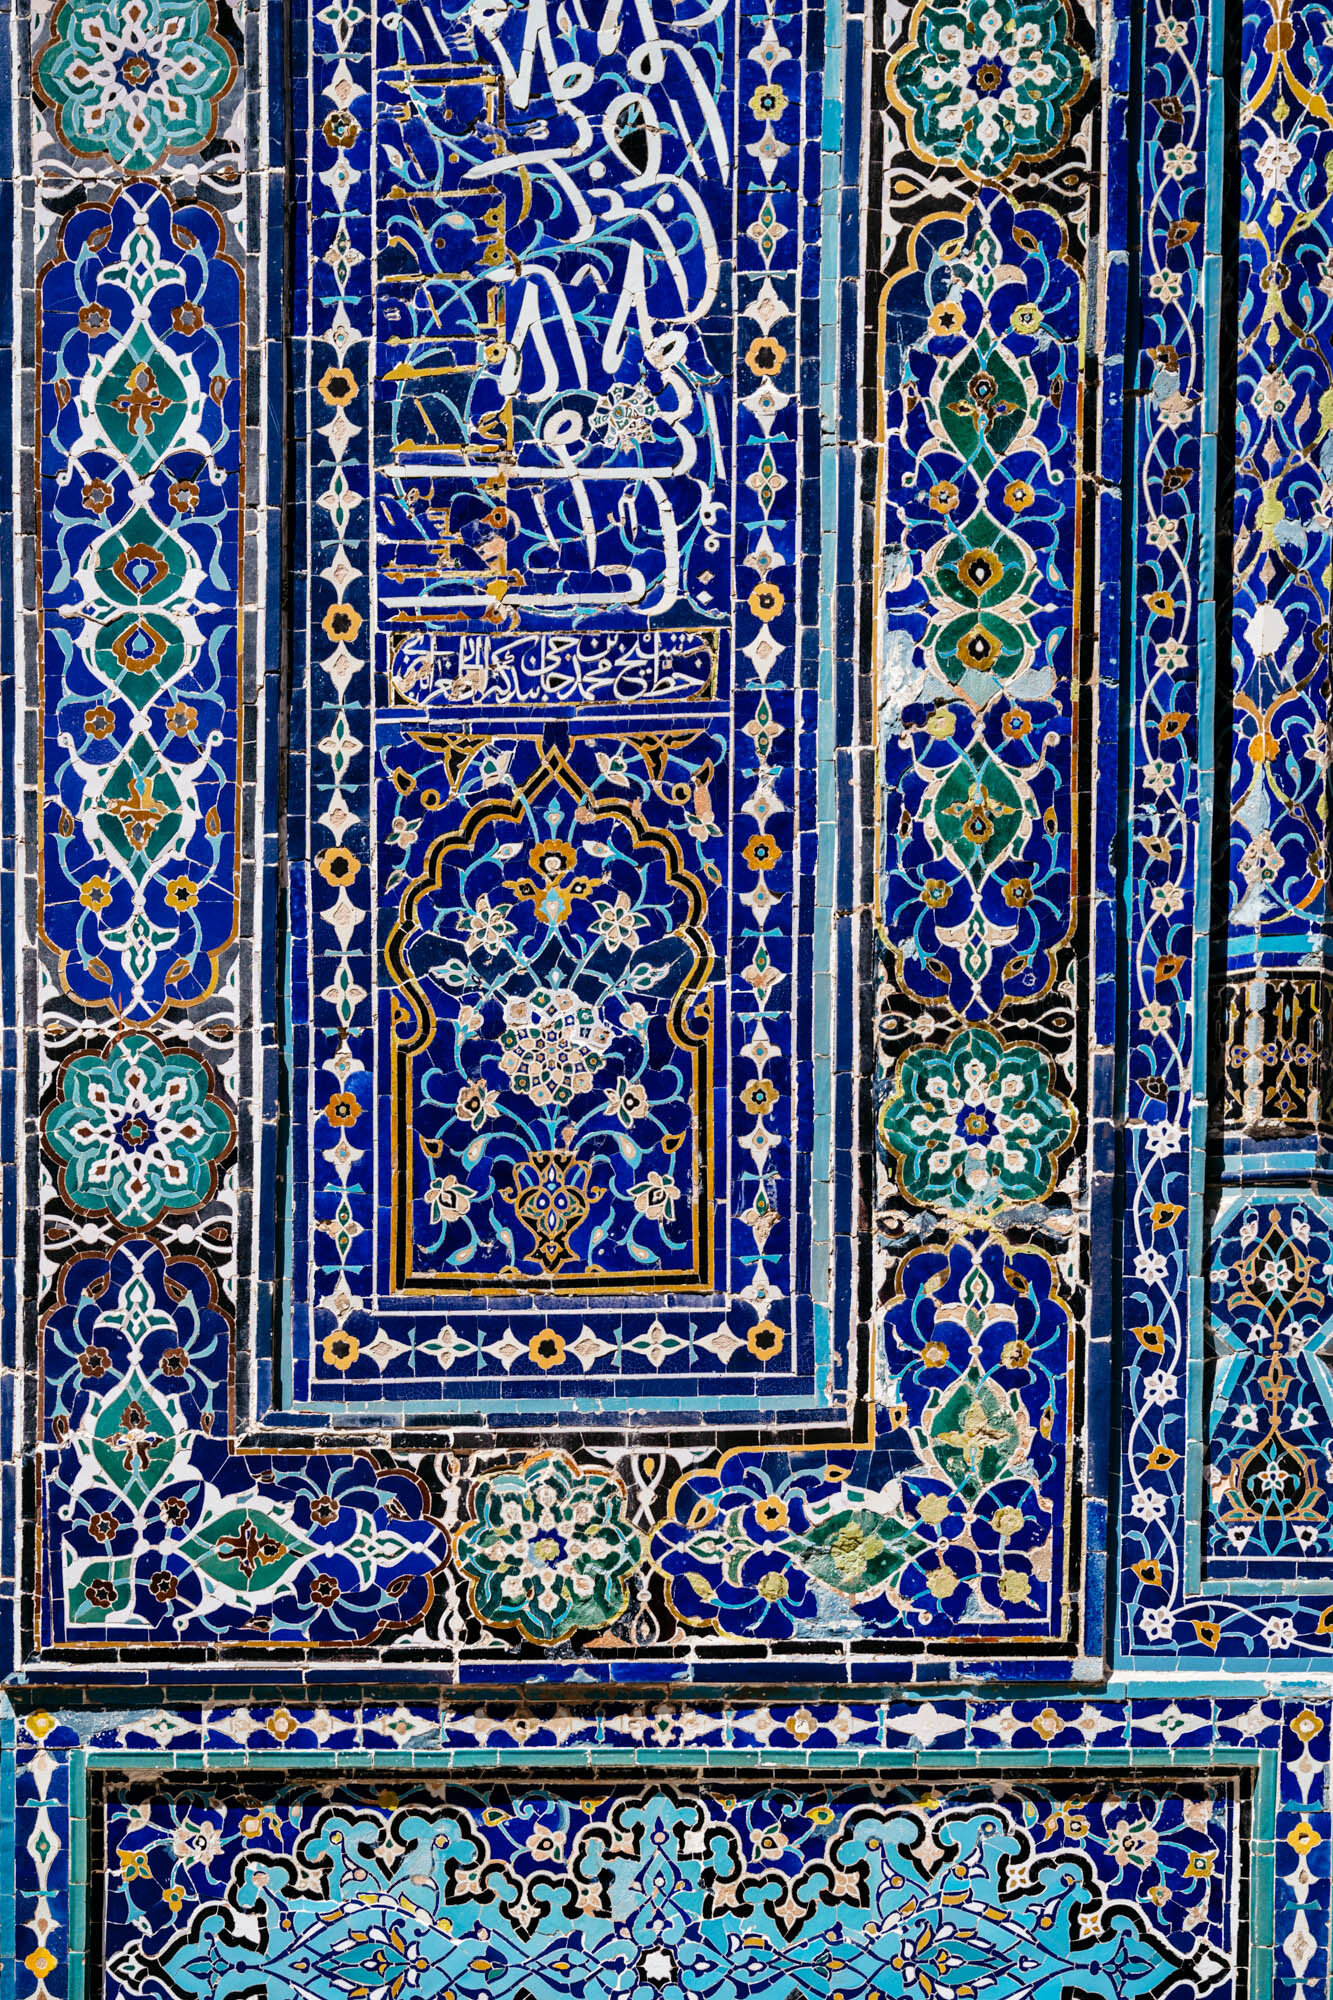  Details from the Shah-i-Zinda tomb complex, Samarkand 